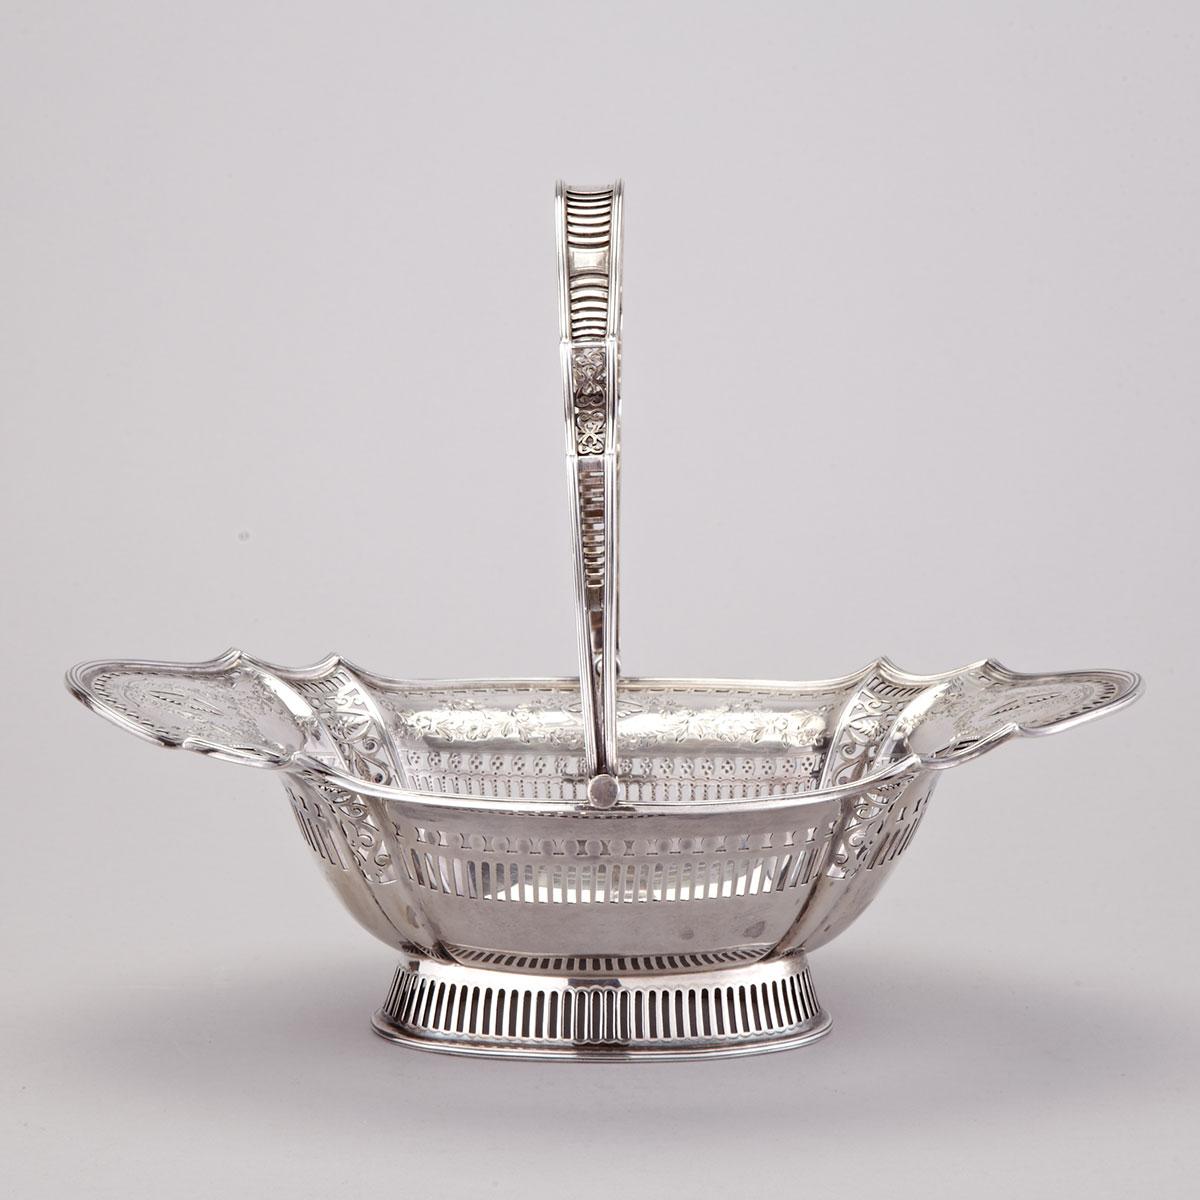 English Silver Pierced and Engraved Oval Basket, William Hutton & Sons, Sheffield, 1911